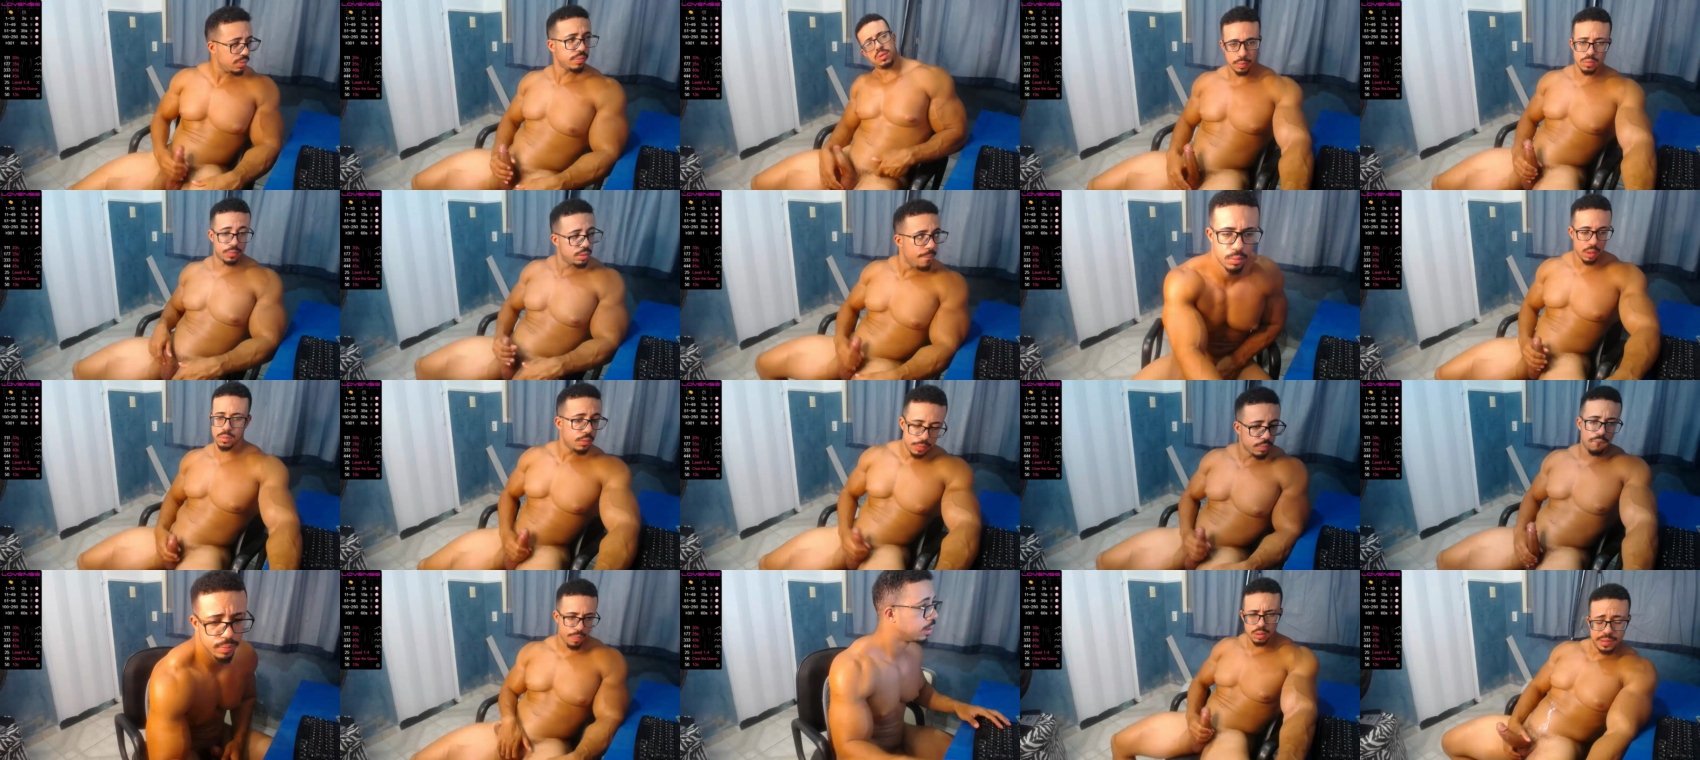 mikehotk  24-01-2022 Males sexy